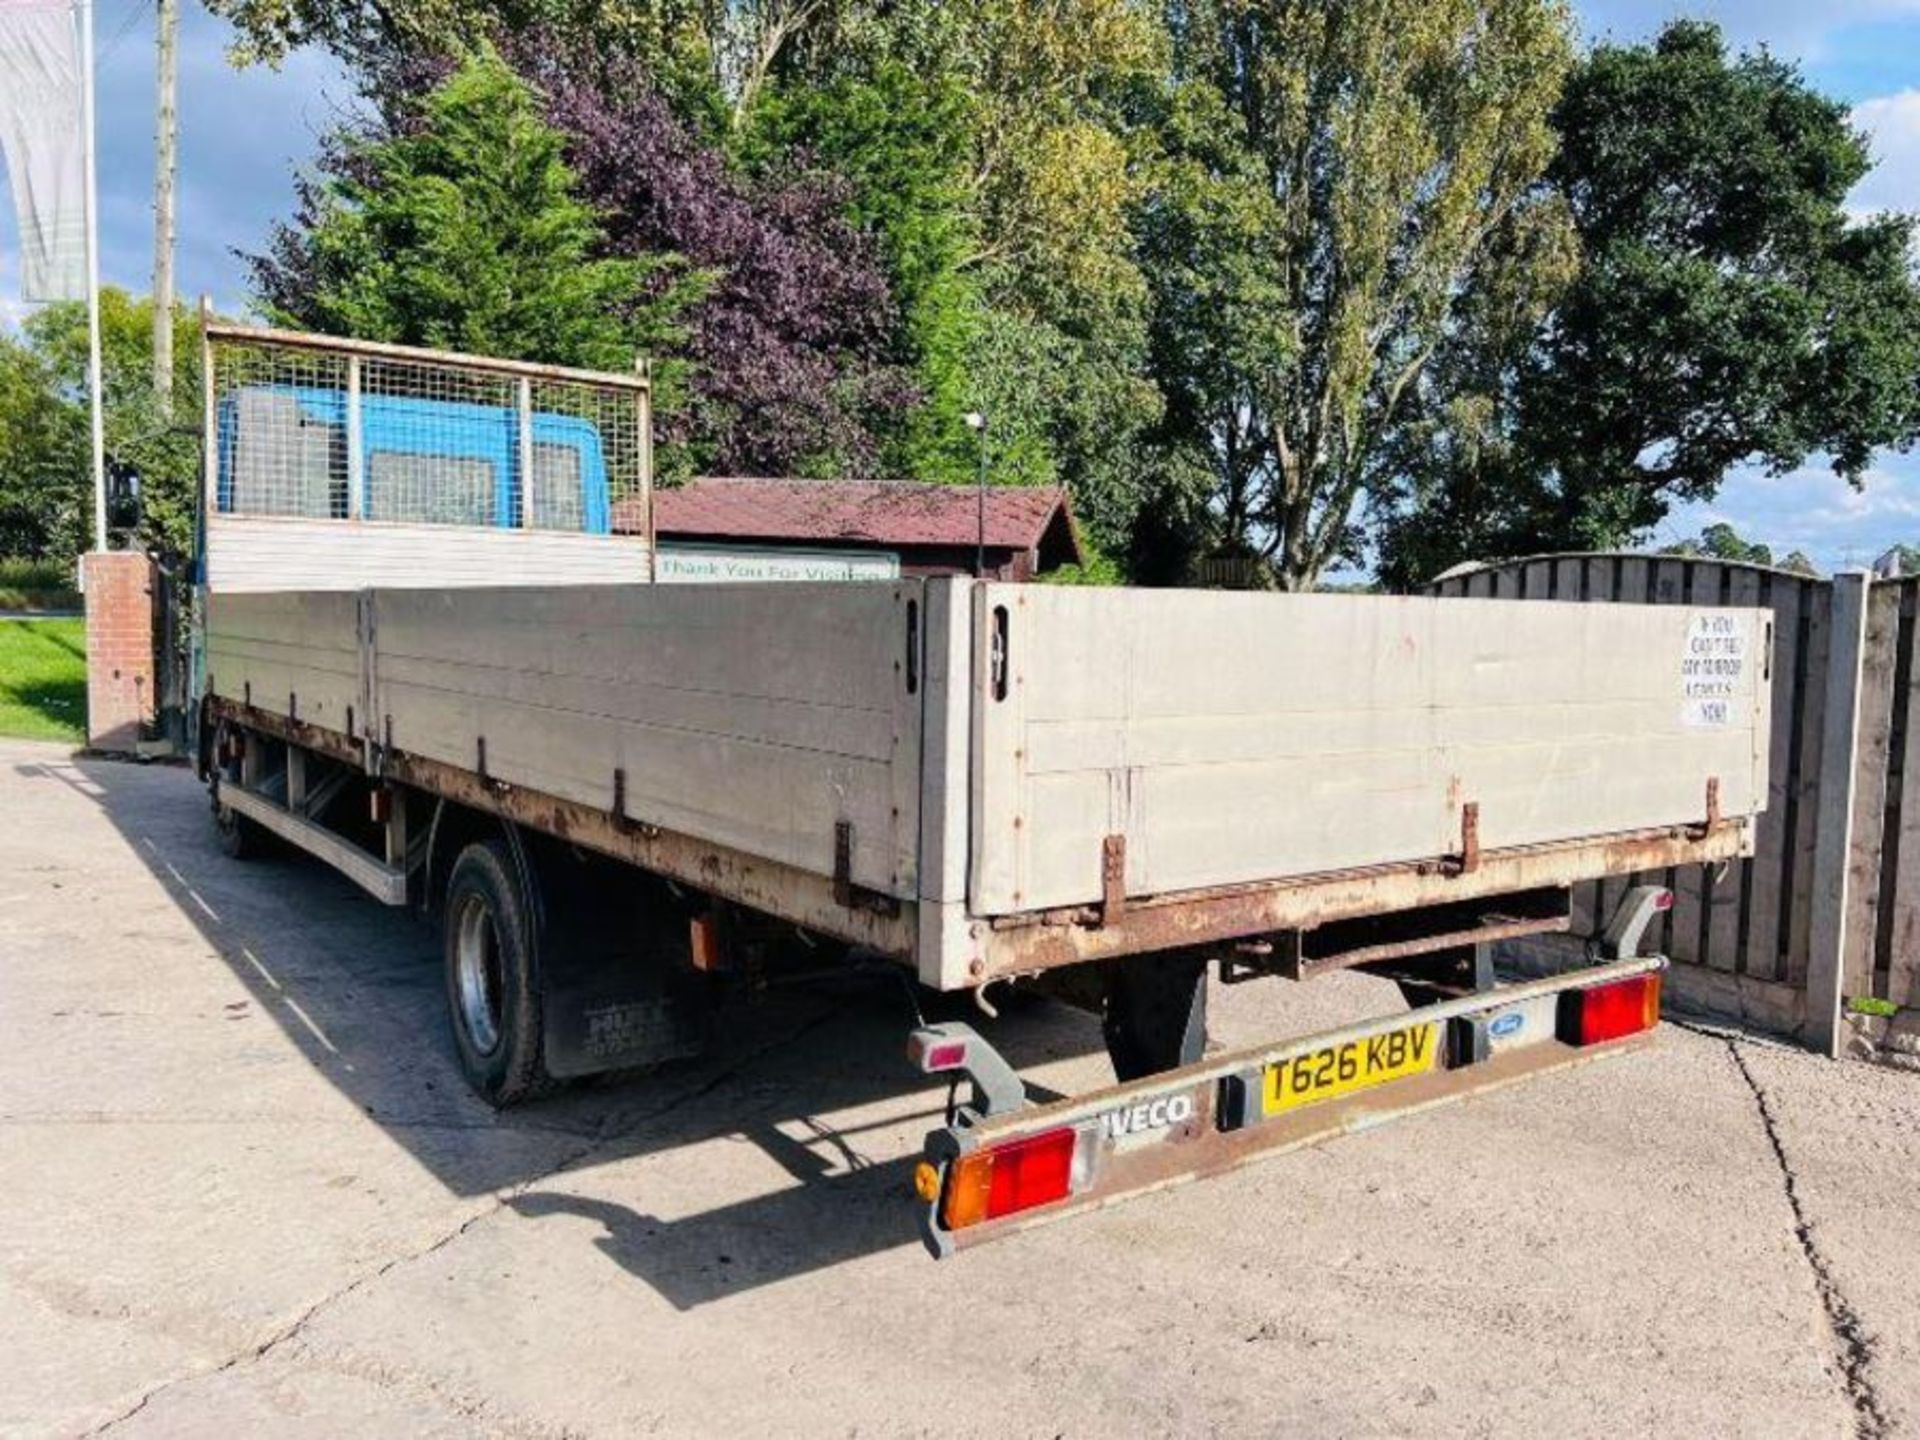 IVECO 4X2 FLAT BED LORRY C/W DROP SIDE BODY - Image 11 of 11